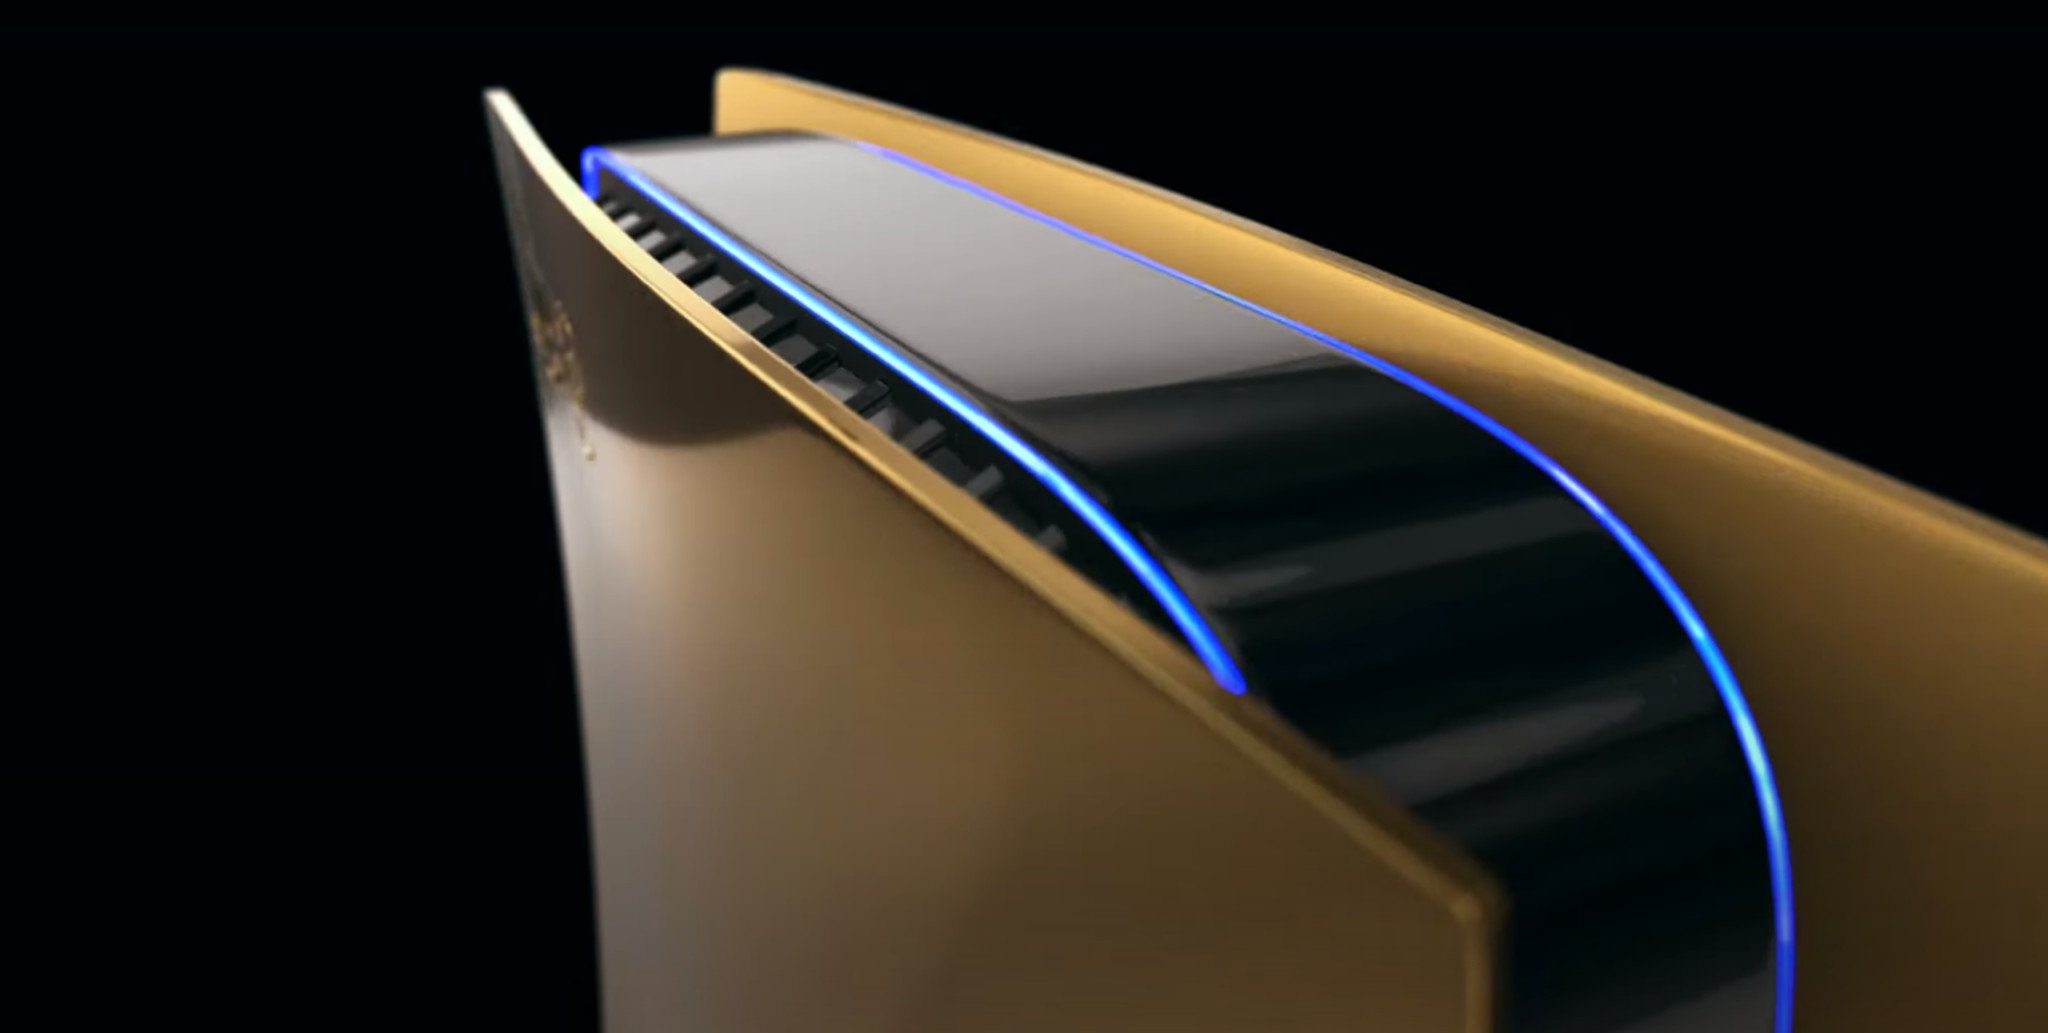 This $10,000+ 24K gold PS5 might have revealed an important PS5